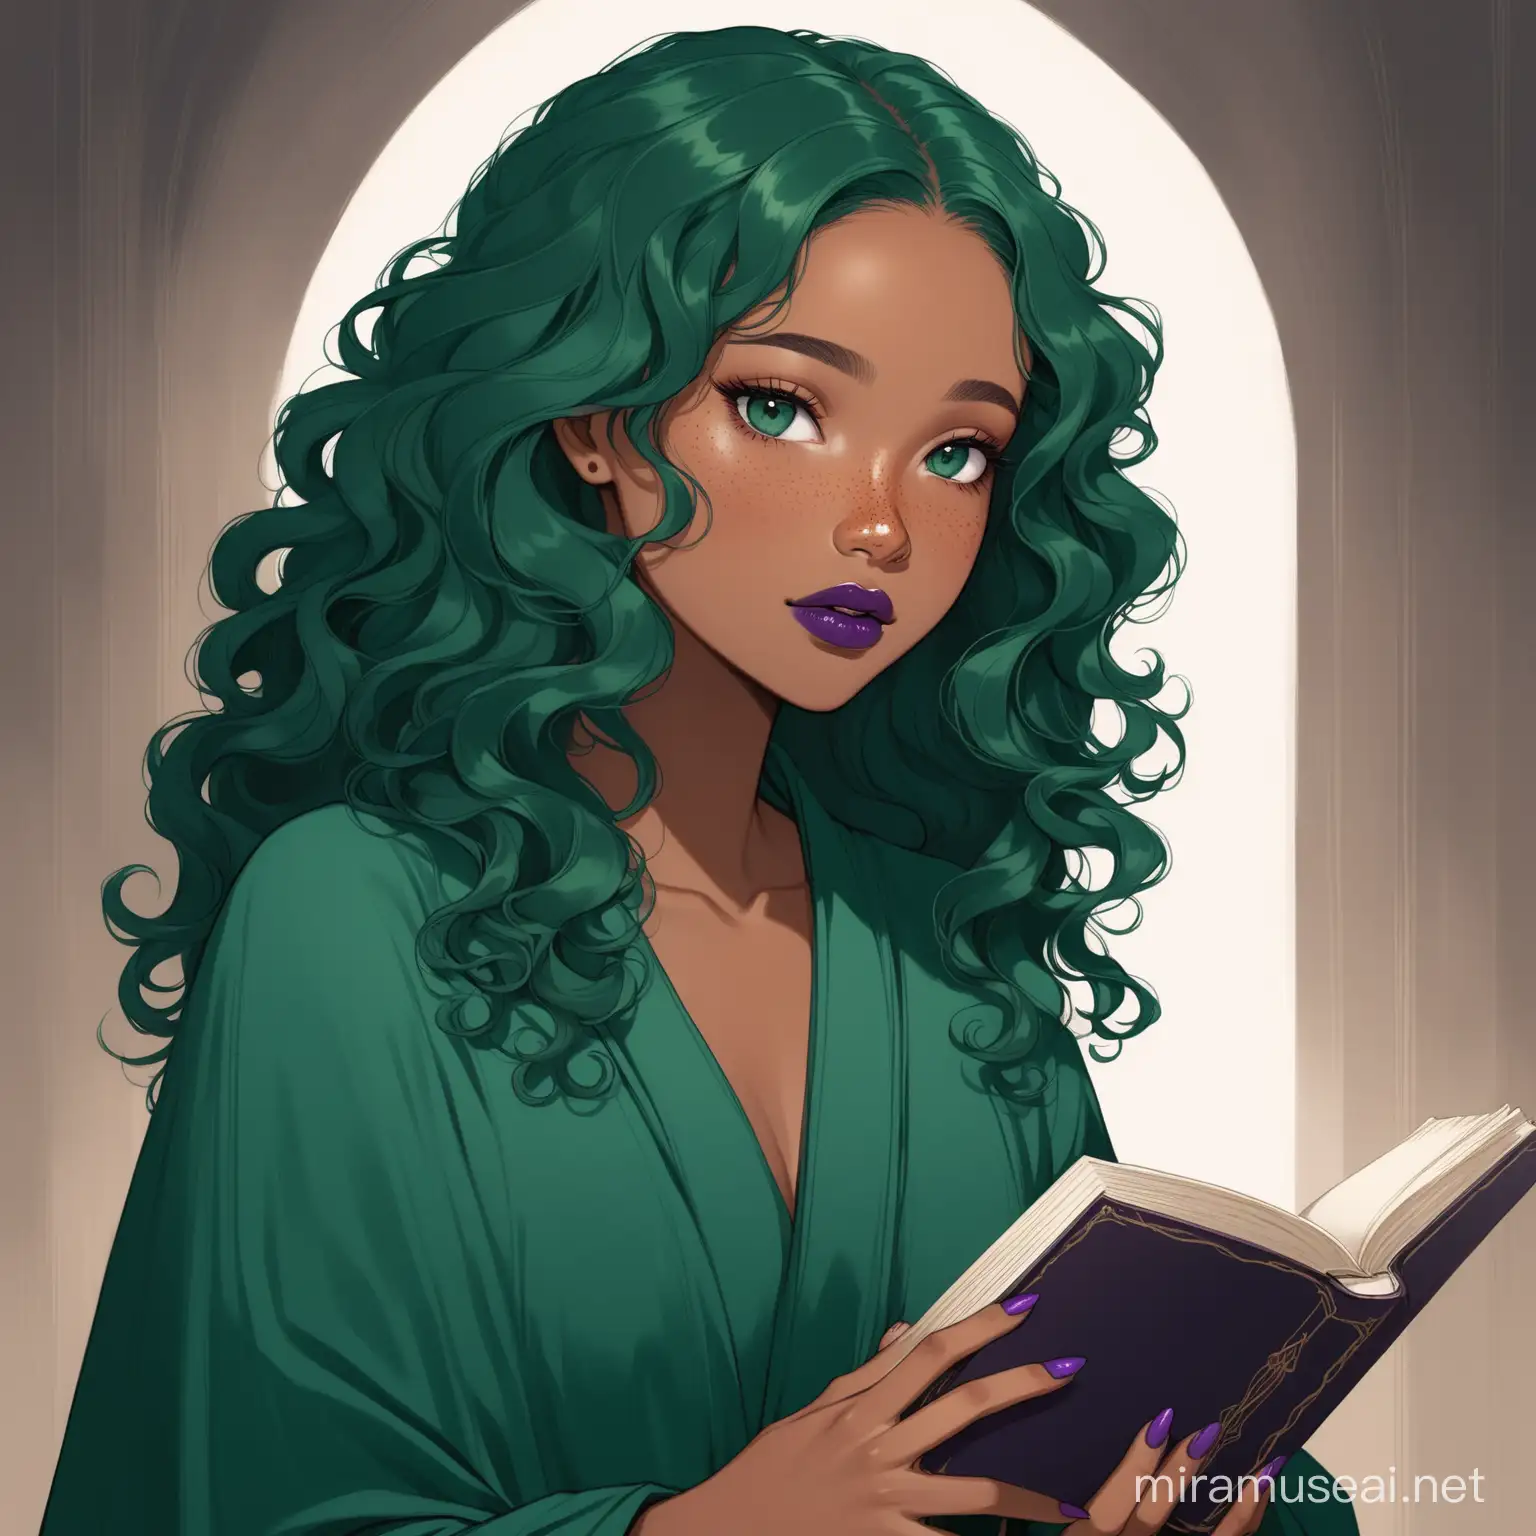 black woman; long dark green robe; she has gray eyes; long curly emerald hair; purple lipstick; and freckles; she is thin; has a book